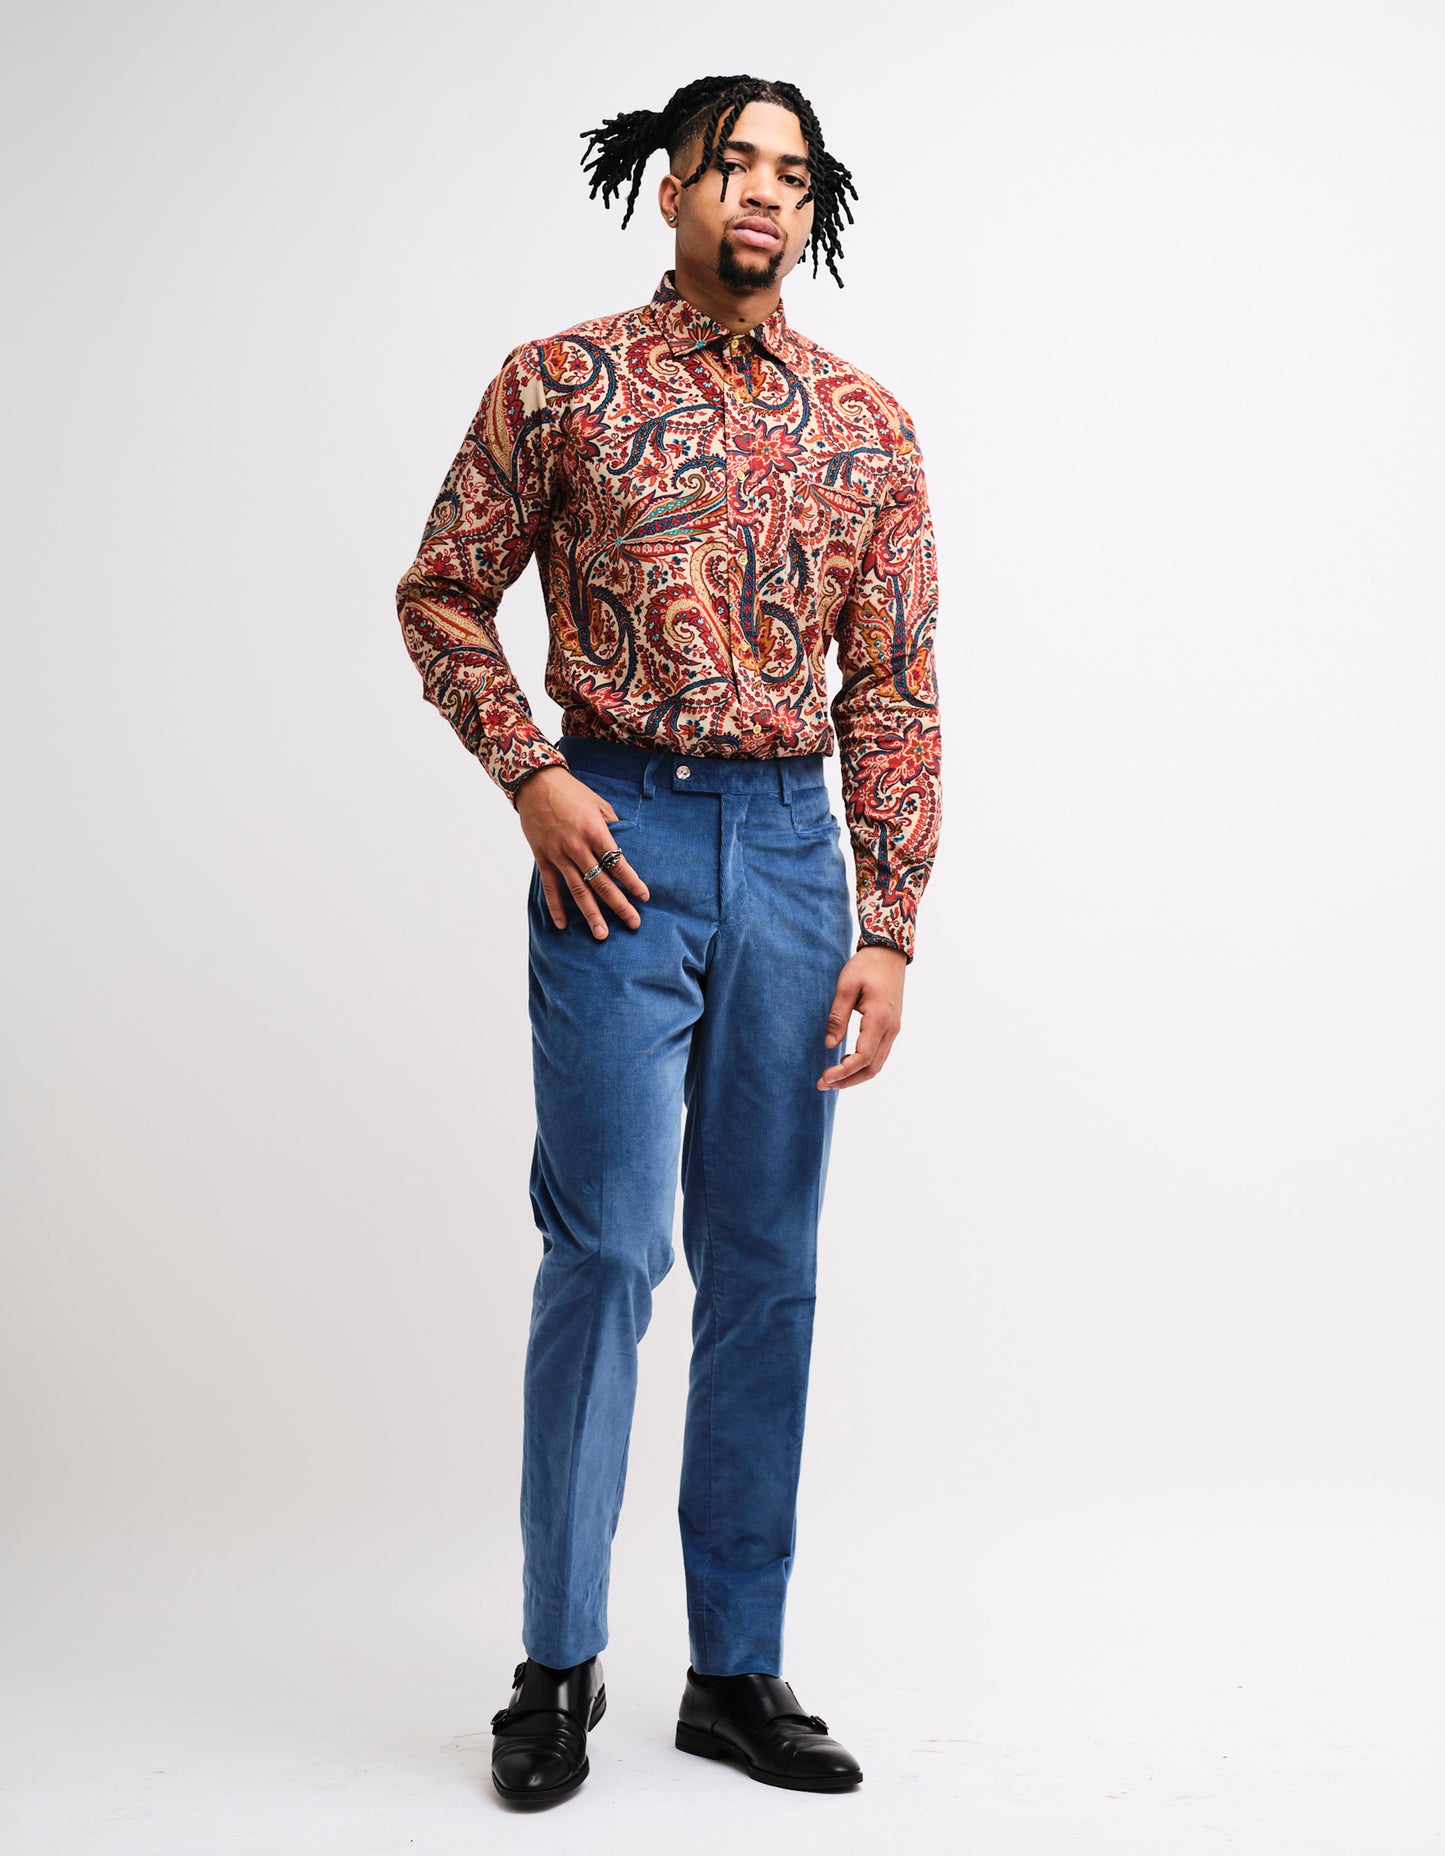 Blue Corduroy Trousers GOLD COLLECTION